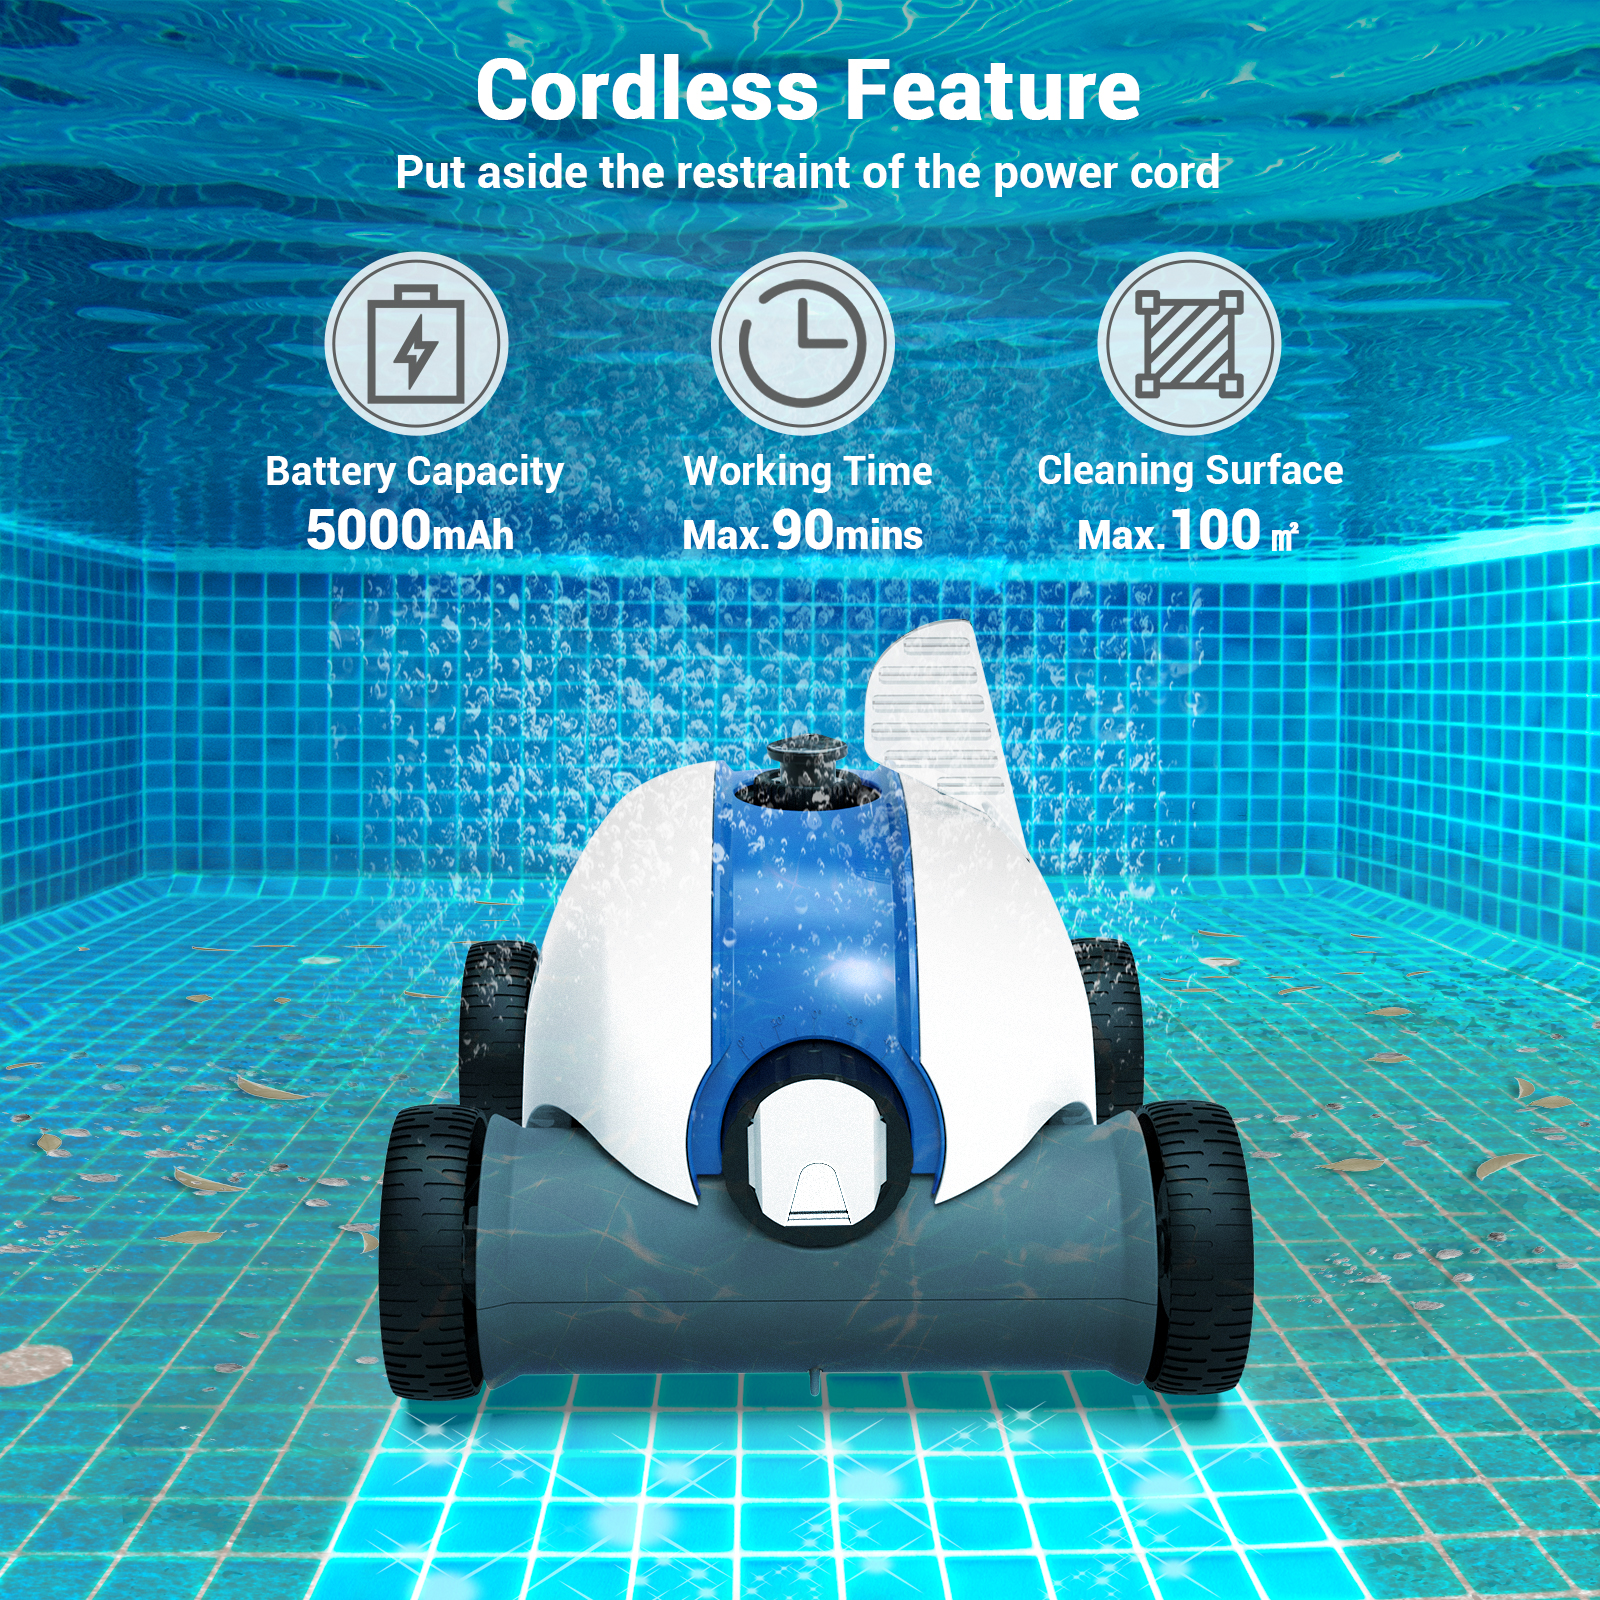 Paxcess Cordless Automatic Robotic Pool Cleaner for in-Ground and Above Ground Swimming Pool - image 2 of 7